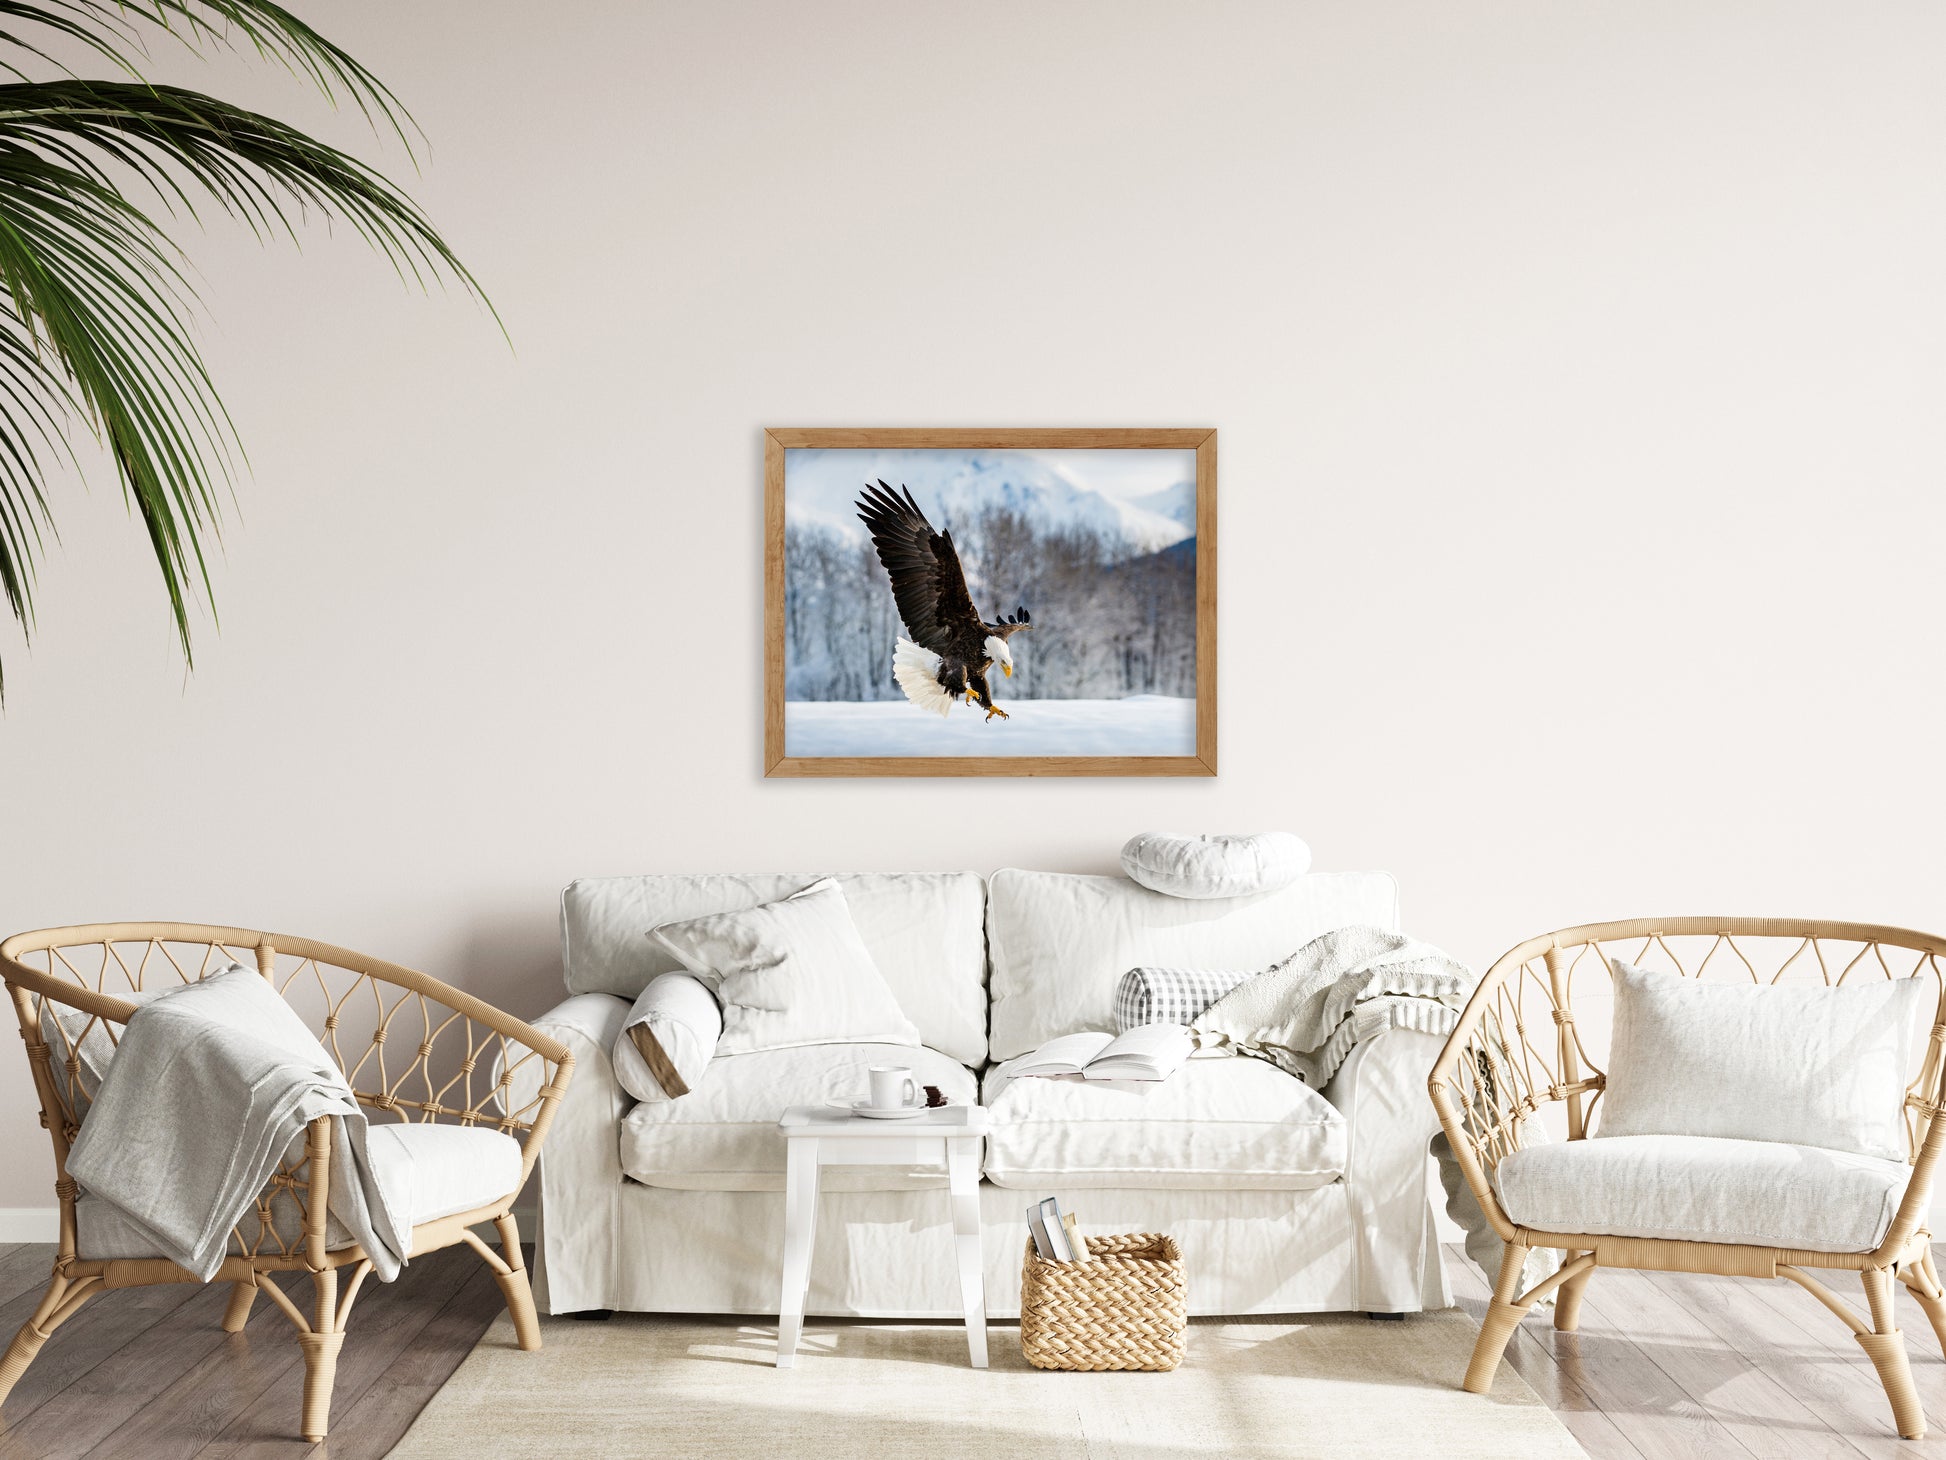 behind couch wall decor, Adult Bald Eagle and Alaskan Winter Animal Wildlife Photograph Framed Wall Art Print